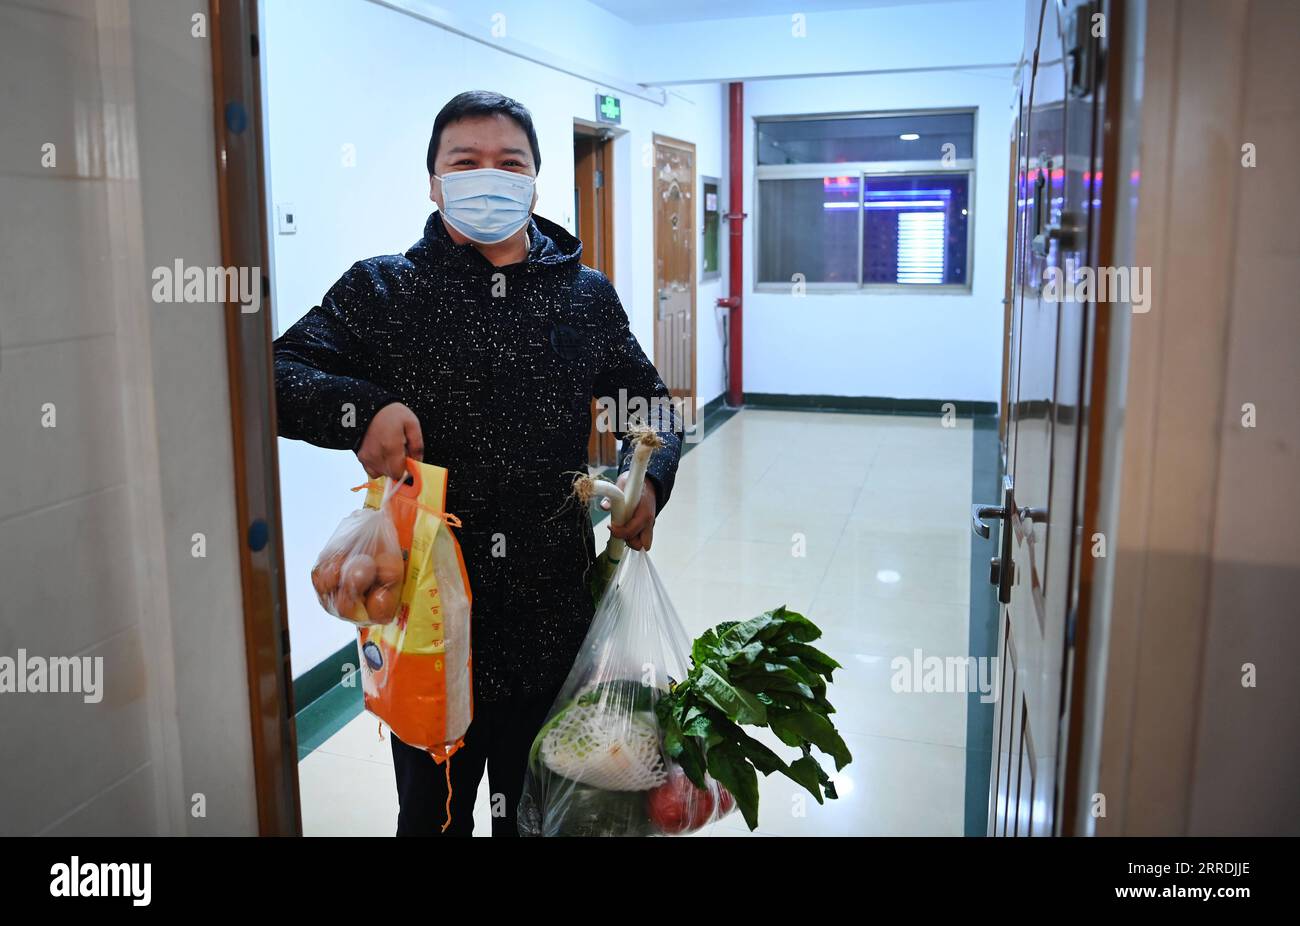 211229 -- XI AN, Dec. 29, 2021 -- A community worker delivers daily necessities to a household under closed-off management in Xi an, capital of northwest China s Shaanxi Province, Dec. 29, 2021. Authorities in Xi an have upgraded epidemic control and prevention measures starting Monday, ordering all residents to stay indoors and refrain from gatherings except when taking nucleic acid tests. Daily necessities of residents were guaranteed every day through delivery services.  CHINA-SHAANXI-XI AN-COVID-19-DAILY SUPPLIES DELIVERY CN TaoxMing PUBLICATIONxNOTxINxCHN Stock Photo